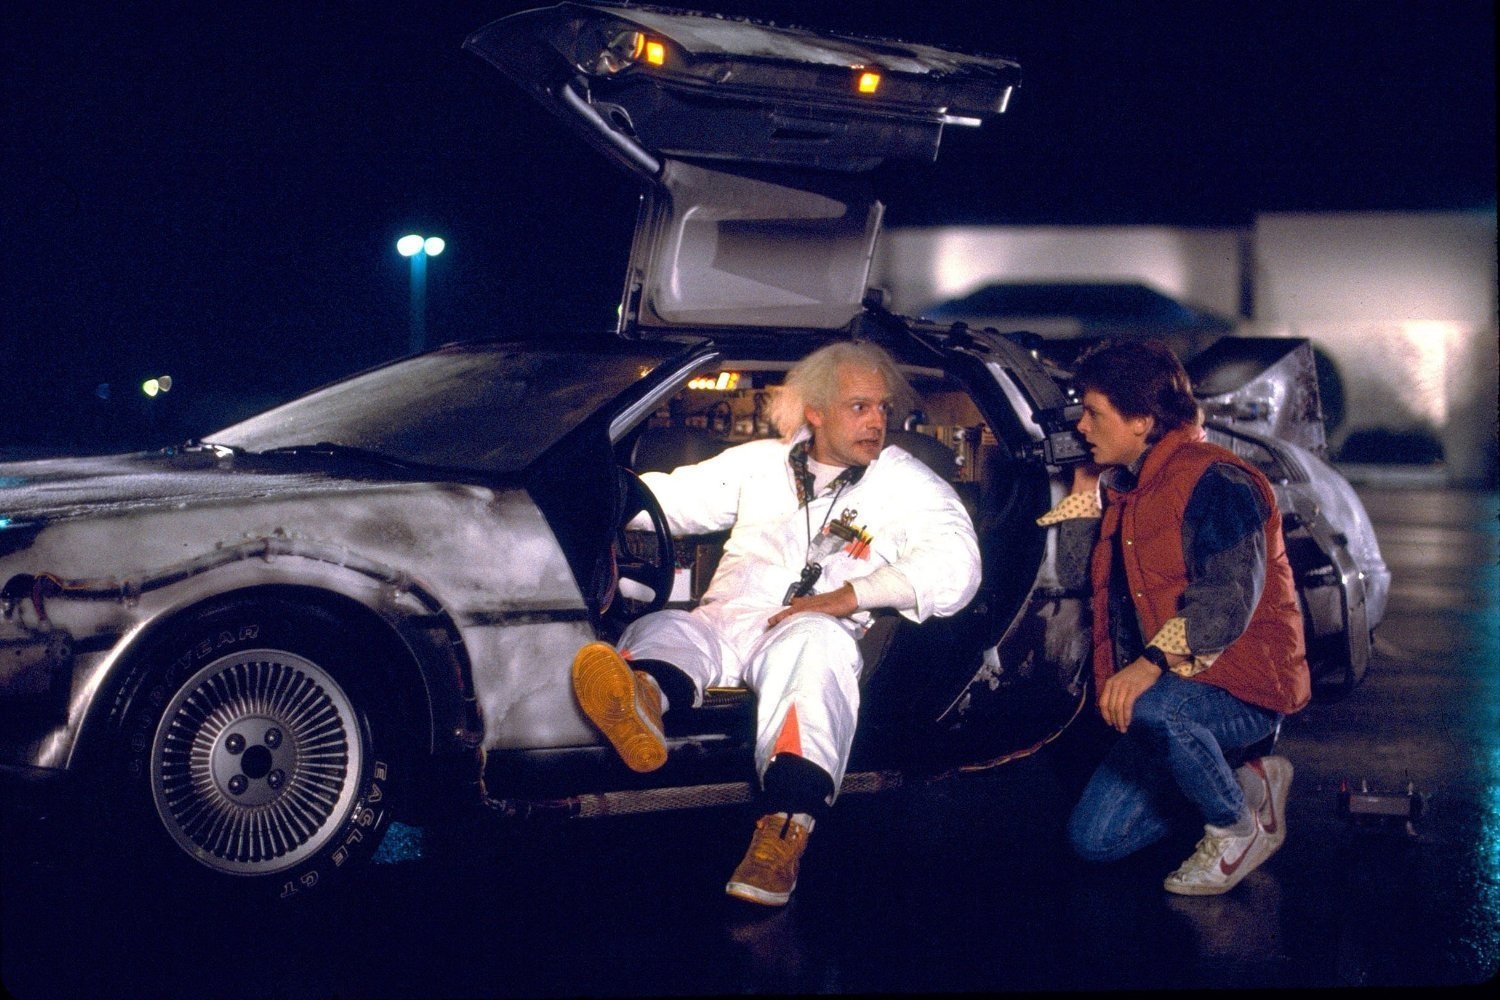 The time traveling machine in the movie Back to the Future was originally supposed to be a refrigerator.